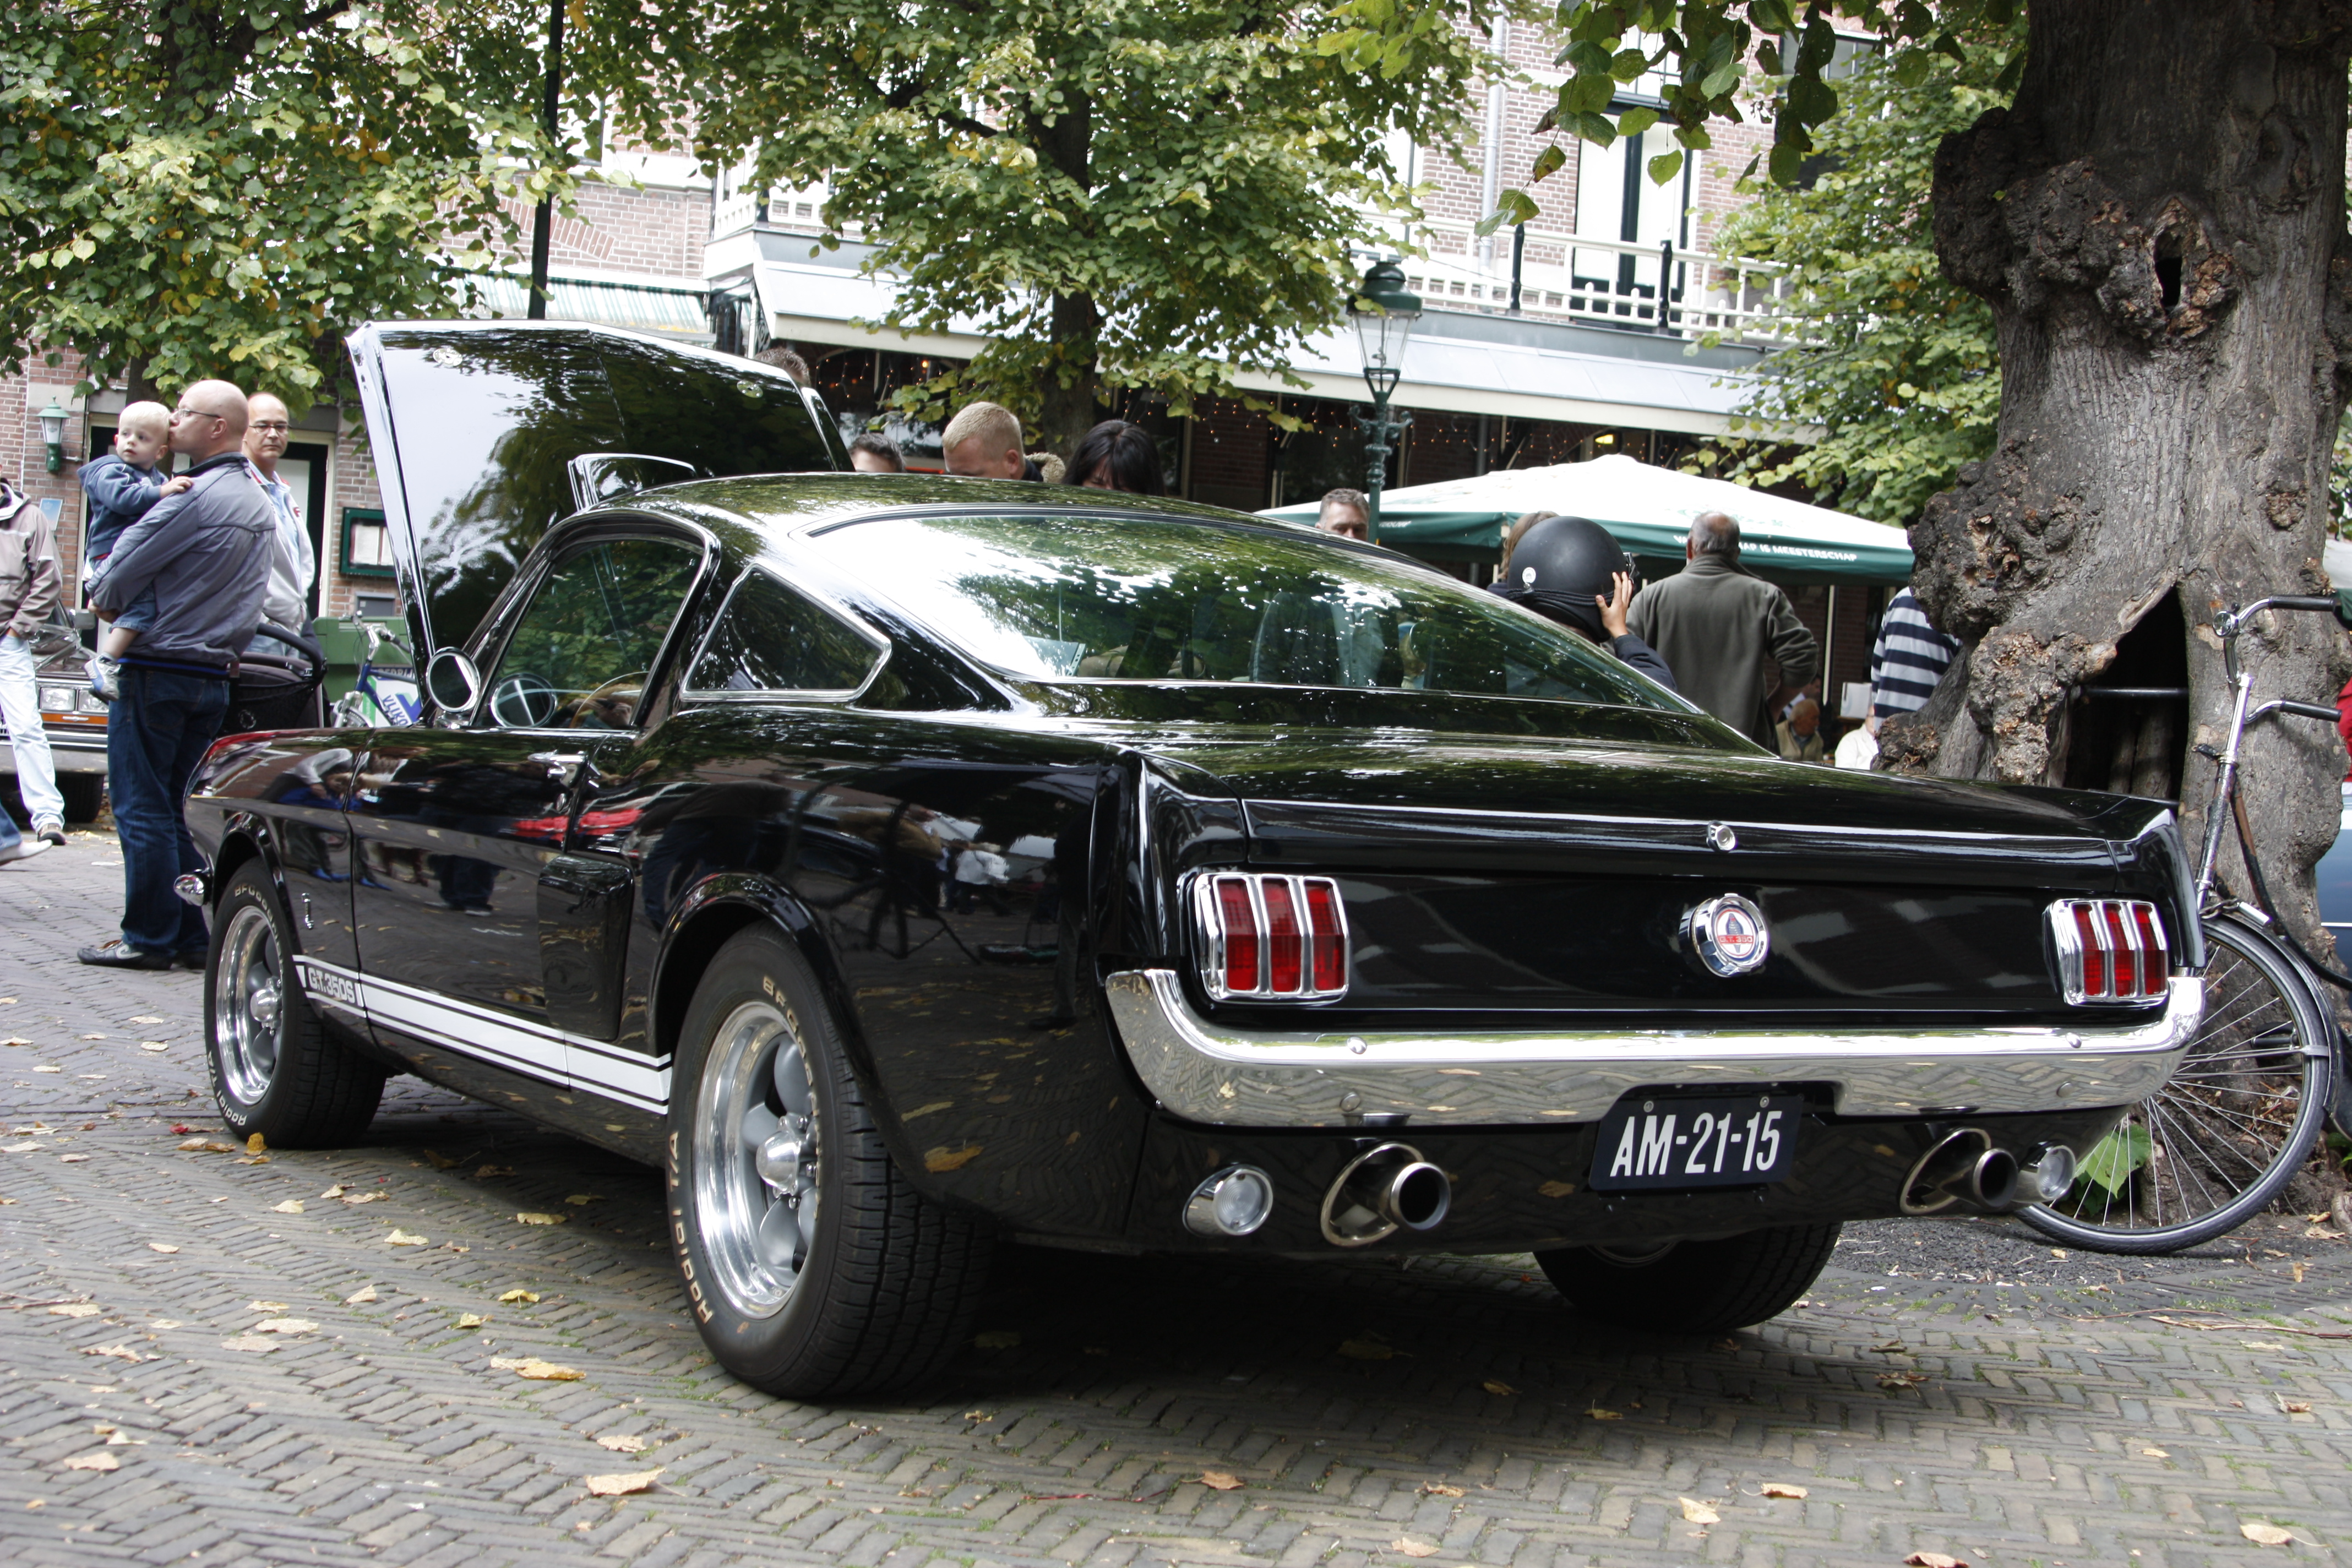 Ford Mustang fastback